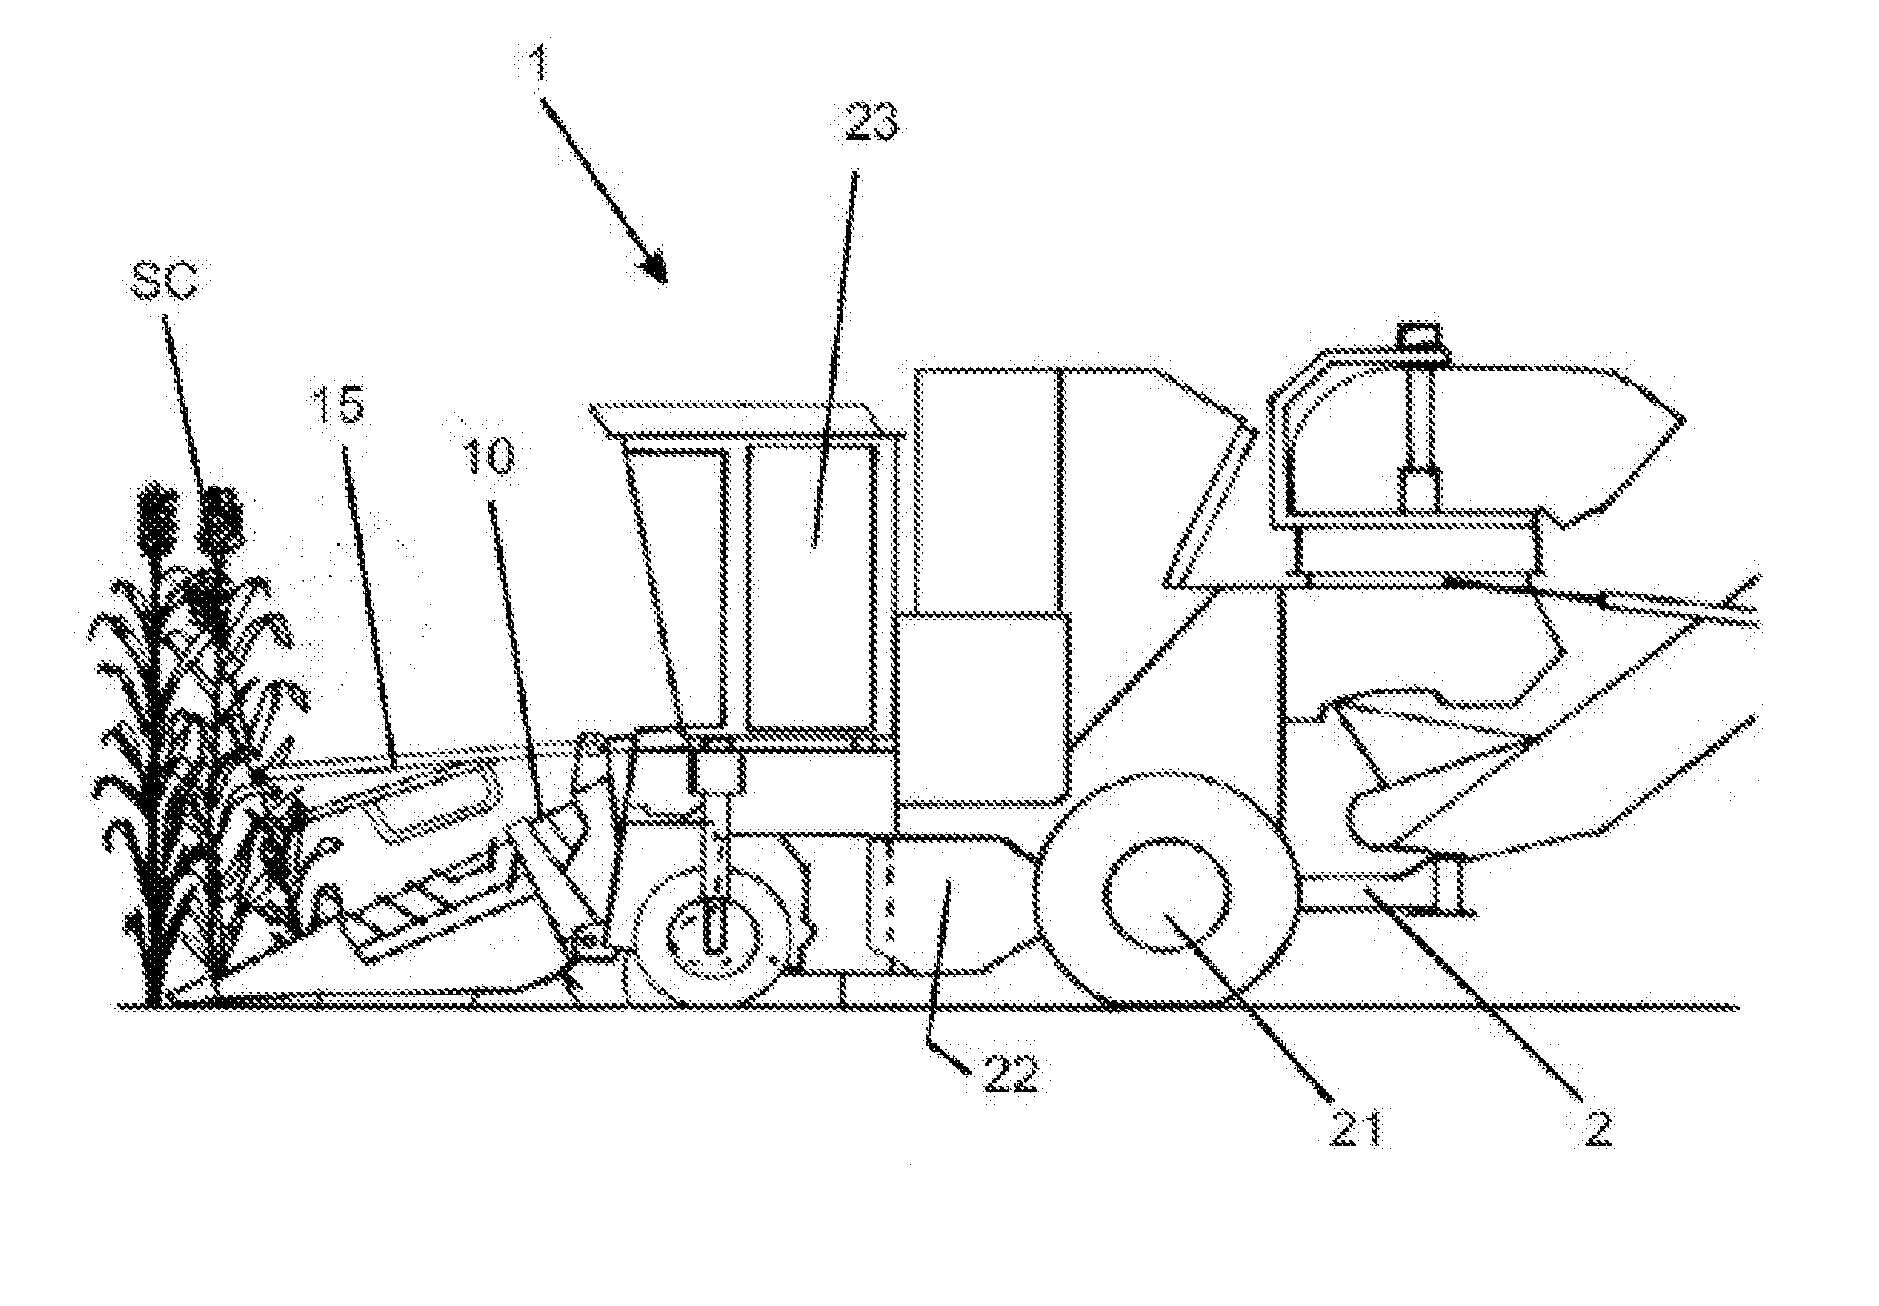 Method and System of Operating an Automotive Harvester